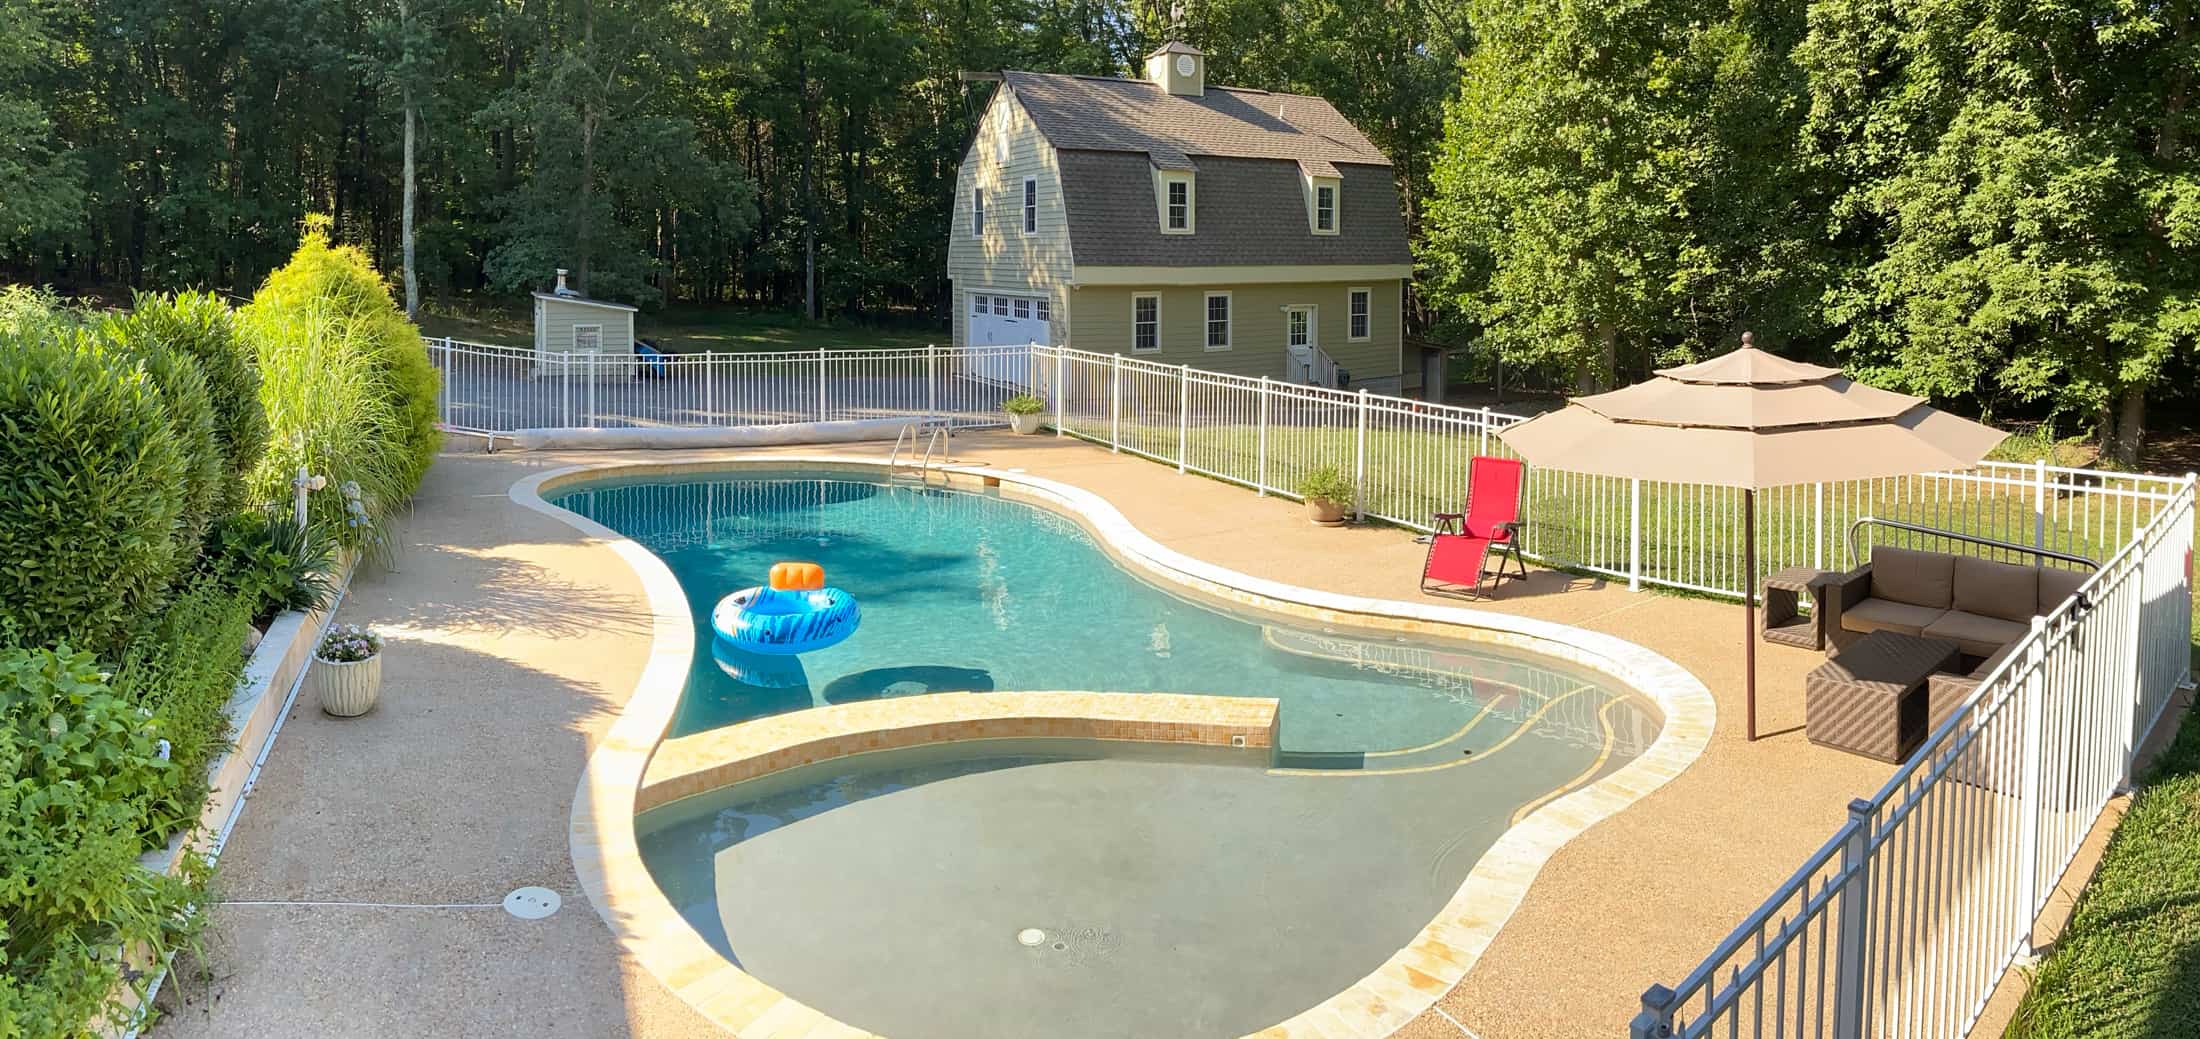 Tranquility and Proximity | Home for sale in Charlottesville, Earlysville, Virginia | Header Image Pool